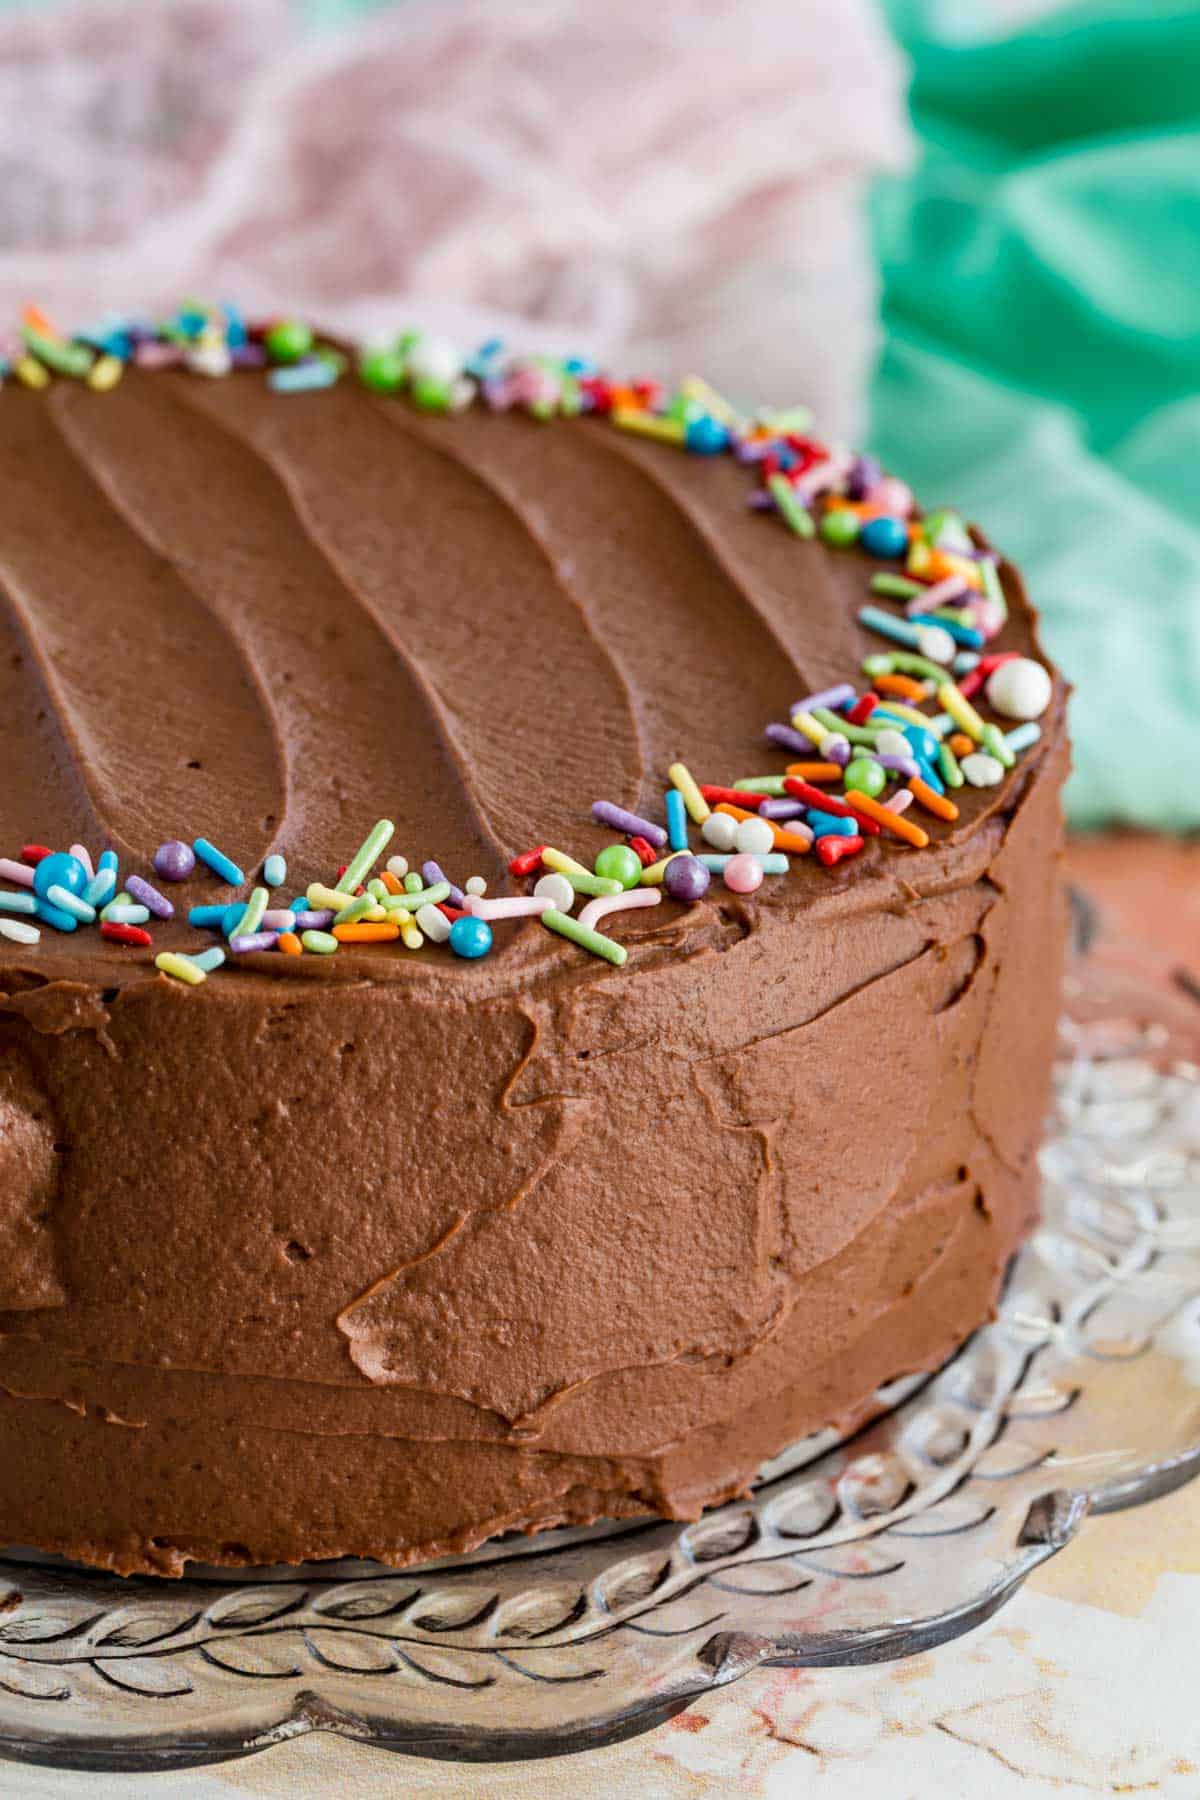 A whole frosted gluten-free chocolate layer cake decorated with rainbow sprinkles.